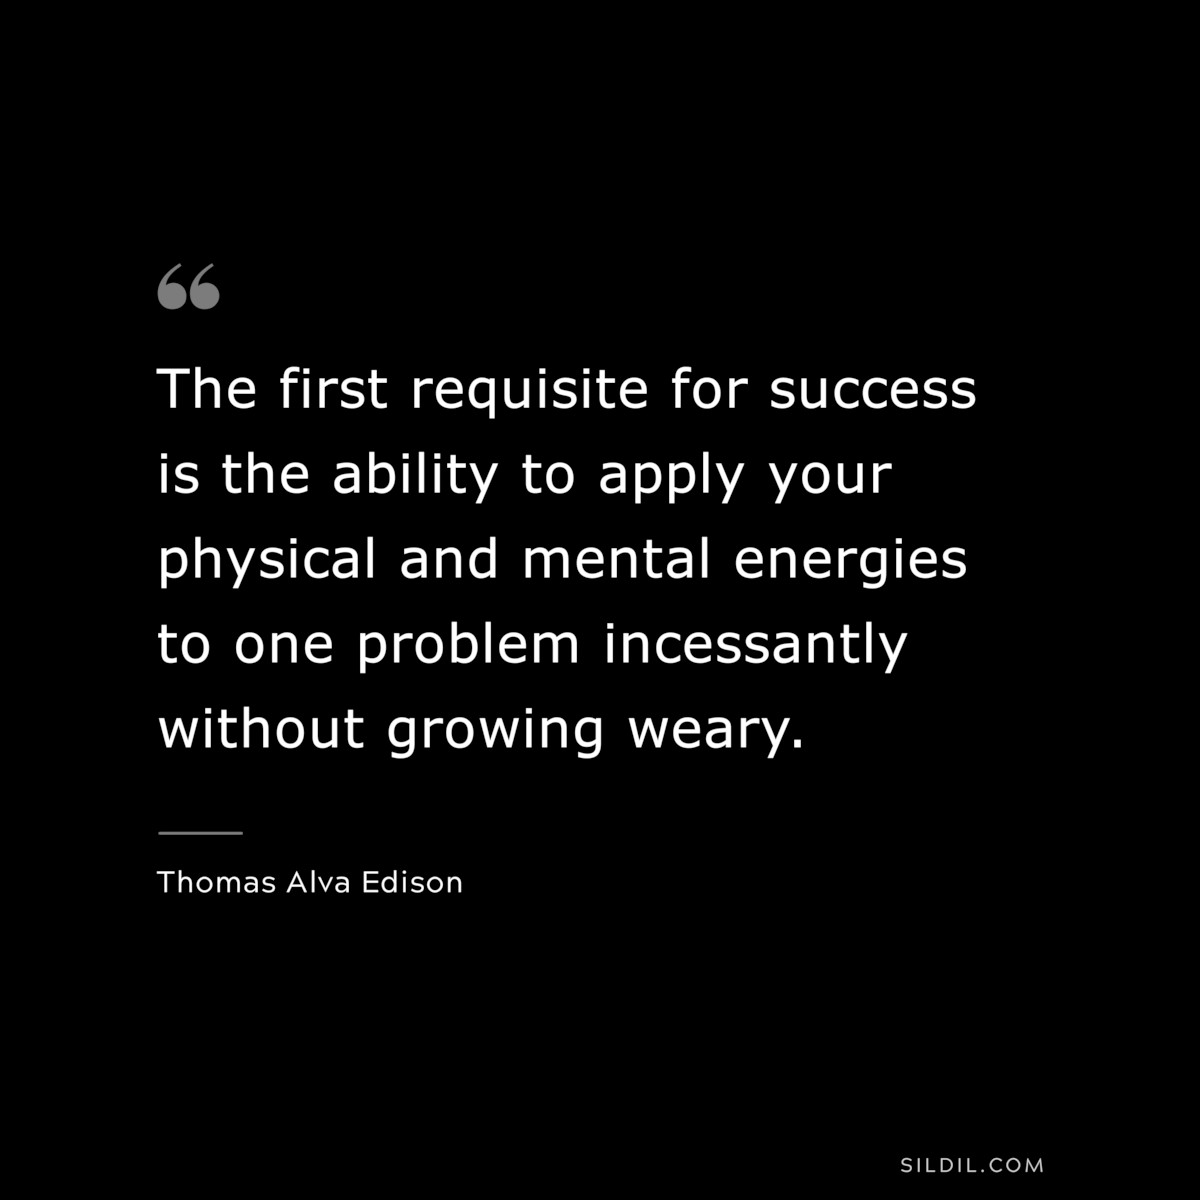 The first requisite for success is the ability to apply your physical and mental energies to one problem incessantly without growing weary. ― Thomas Alva Edison